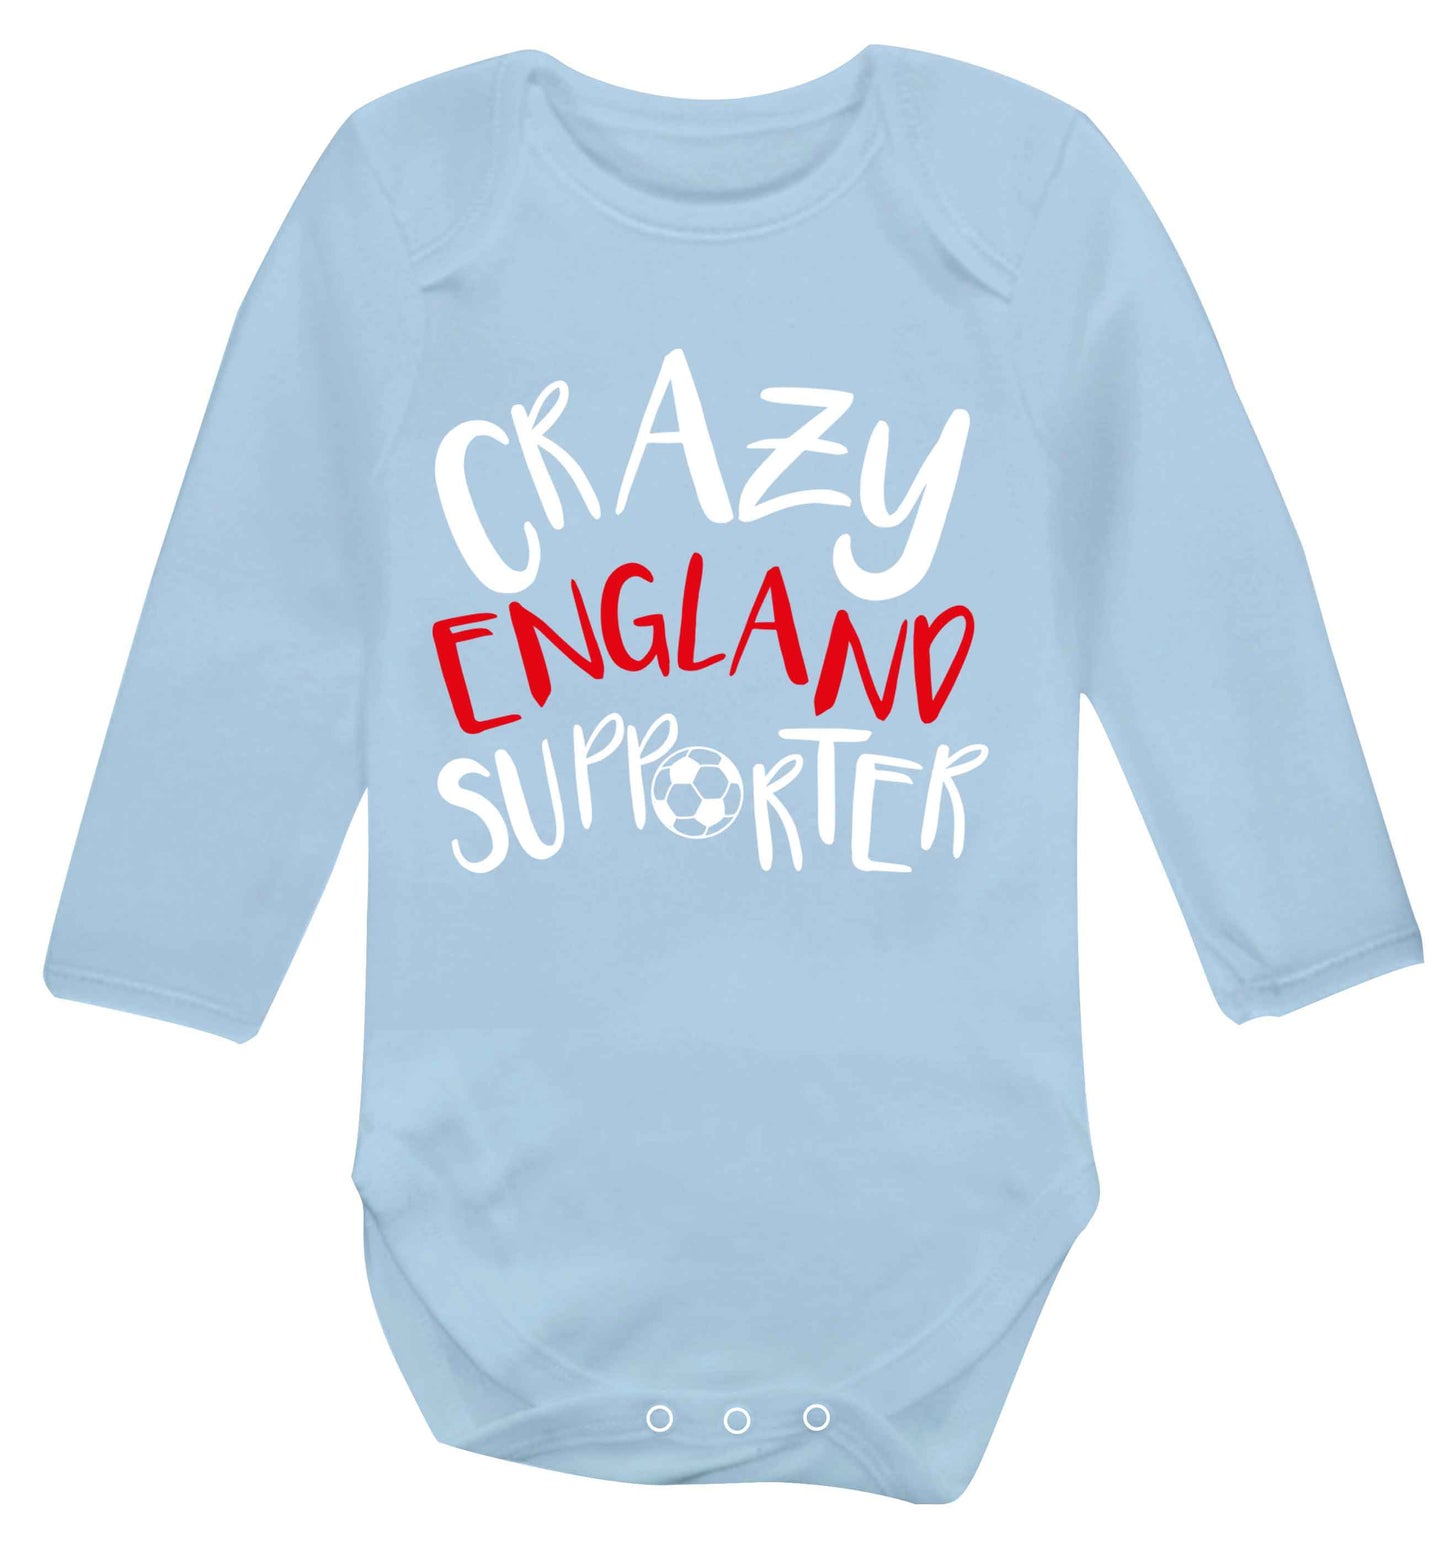 Crazy England supporter Baby Vest long sleeved pale blue 6-12 months